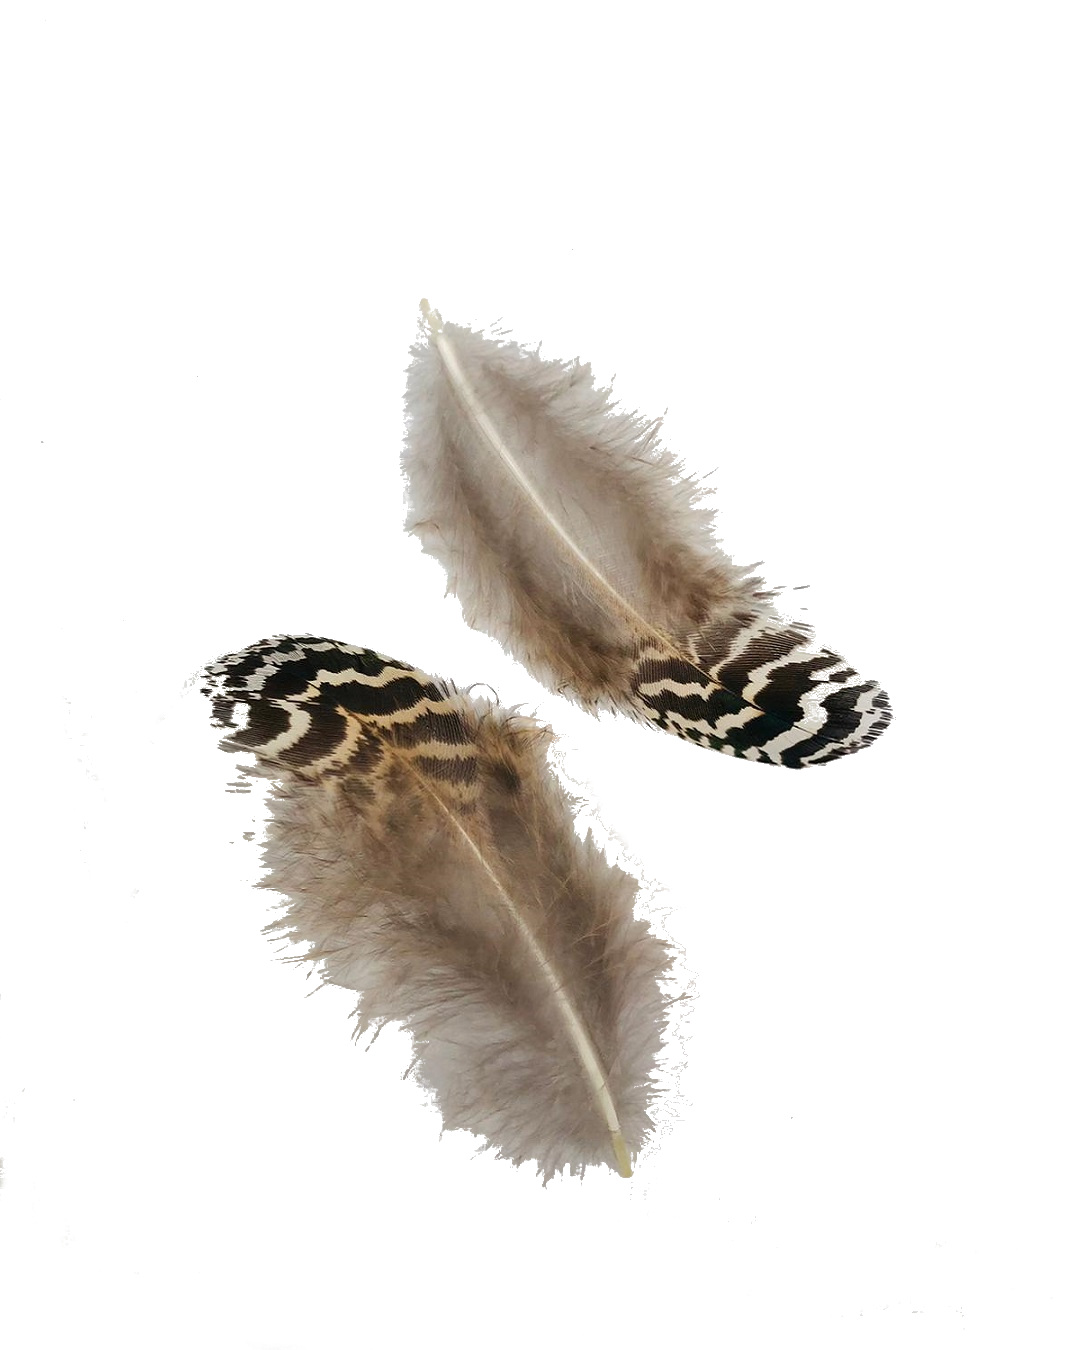 Peacock plumage feathers